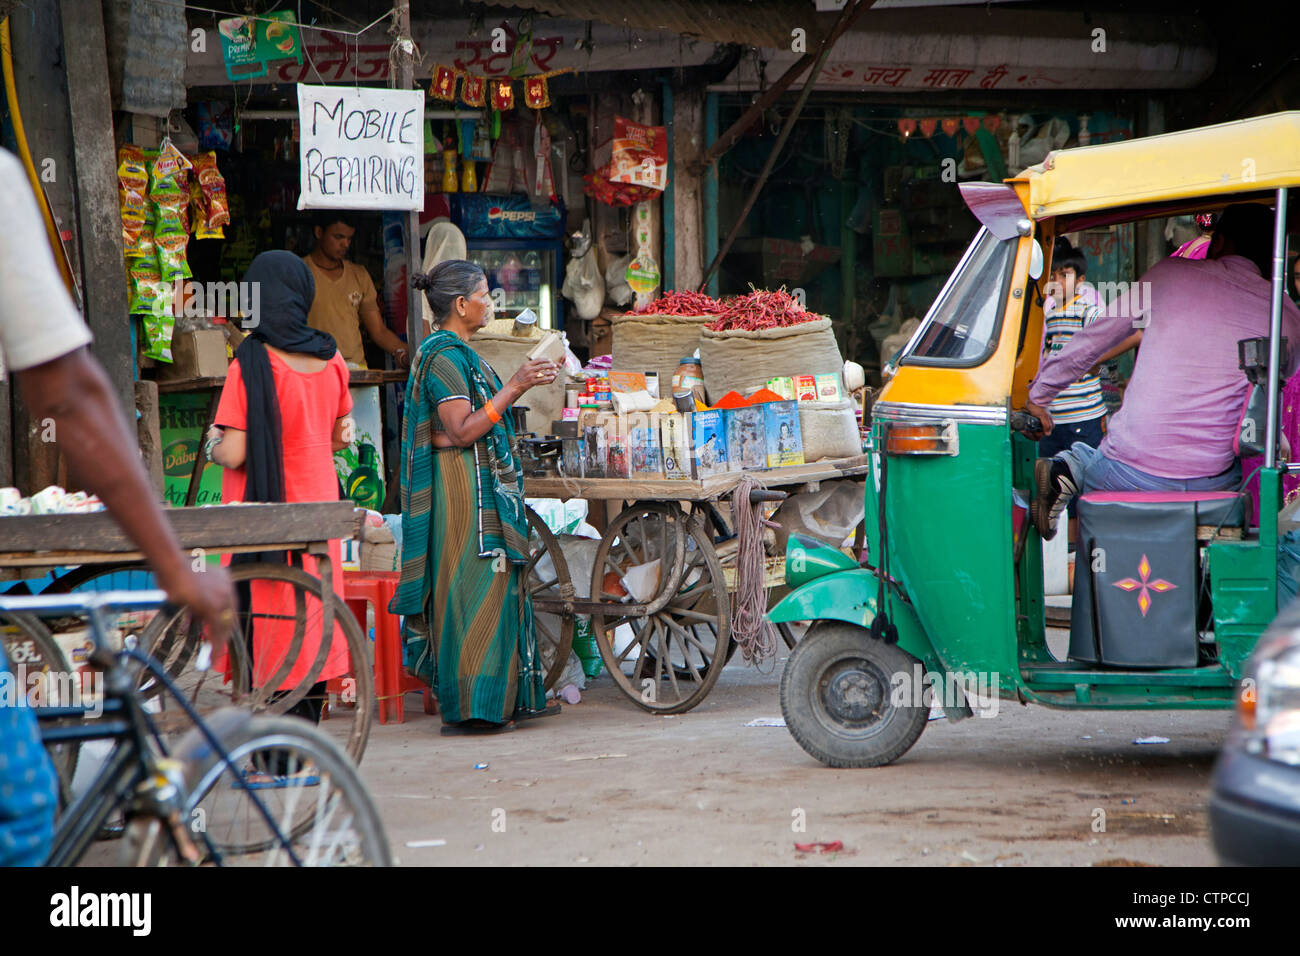 Mobile repair shop and three-wheeled taxi / bajaj in busy street in Delhi, India Stock Photo